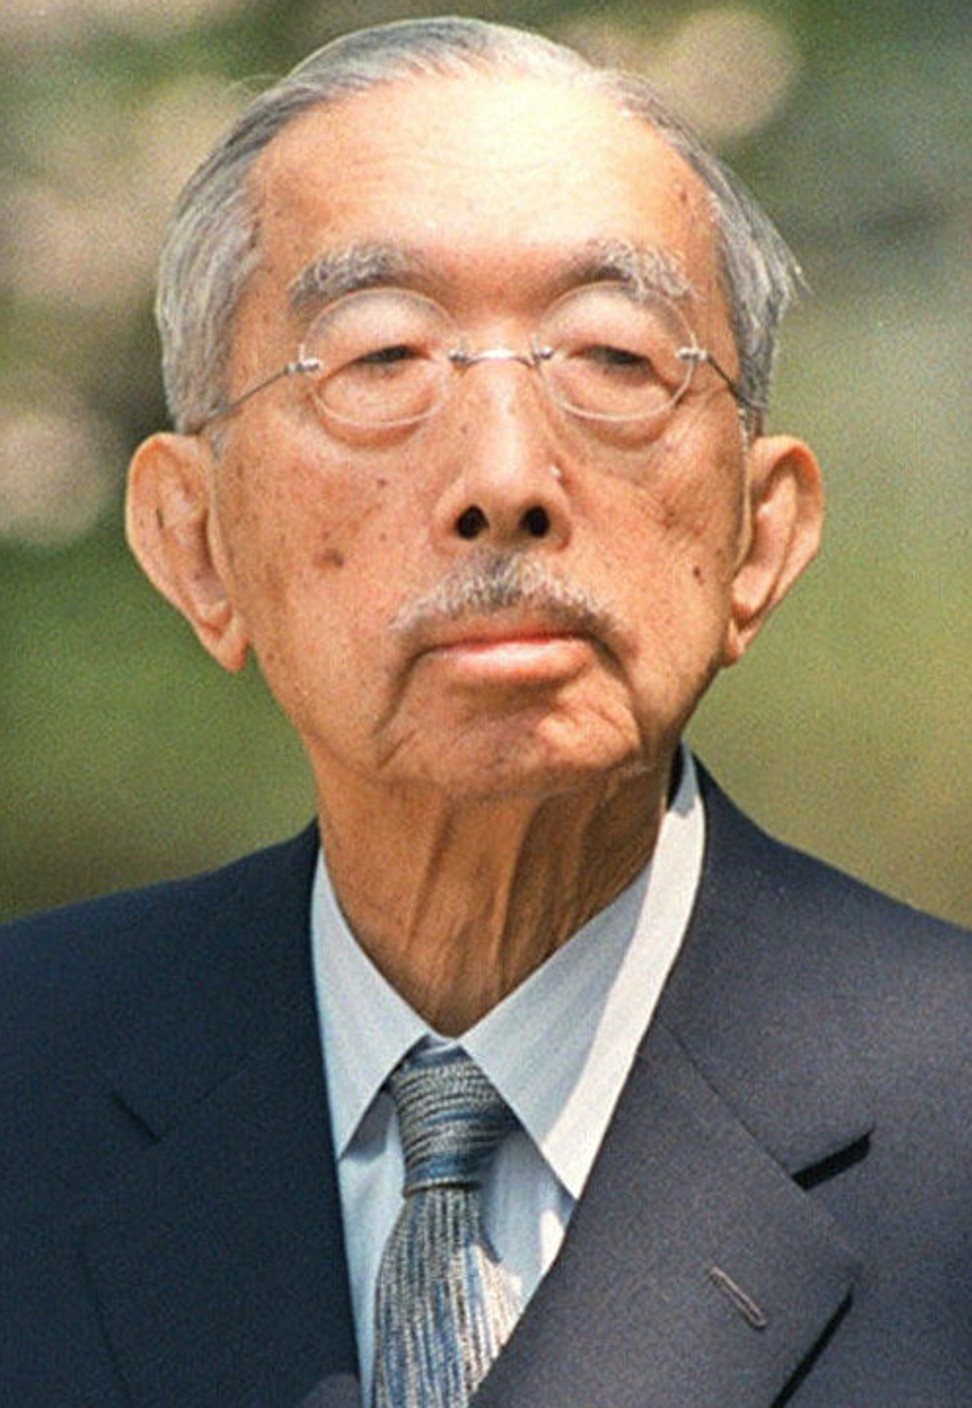 Hirohito died in 1989 at age 87 after 62 years on the throne. Photo: Kyodo